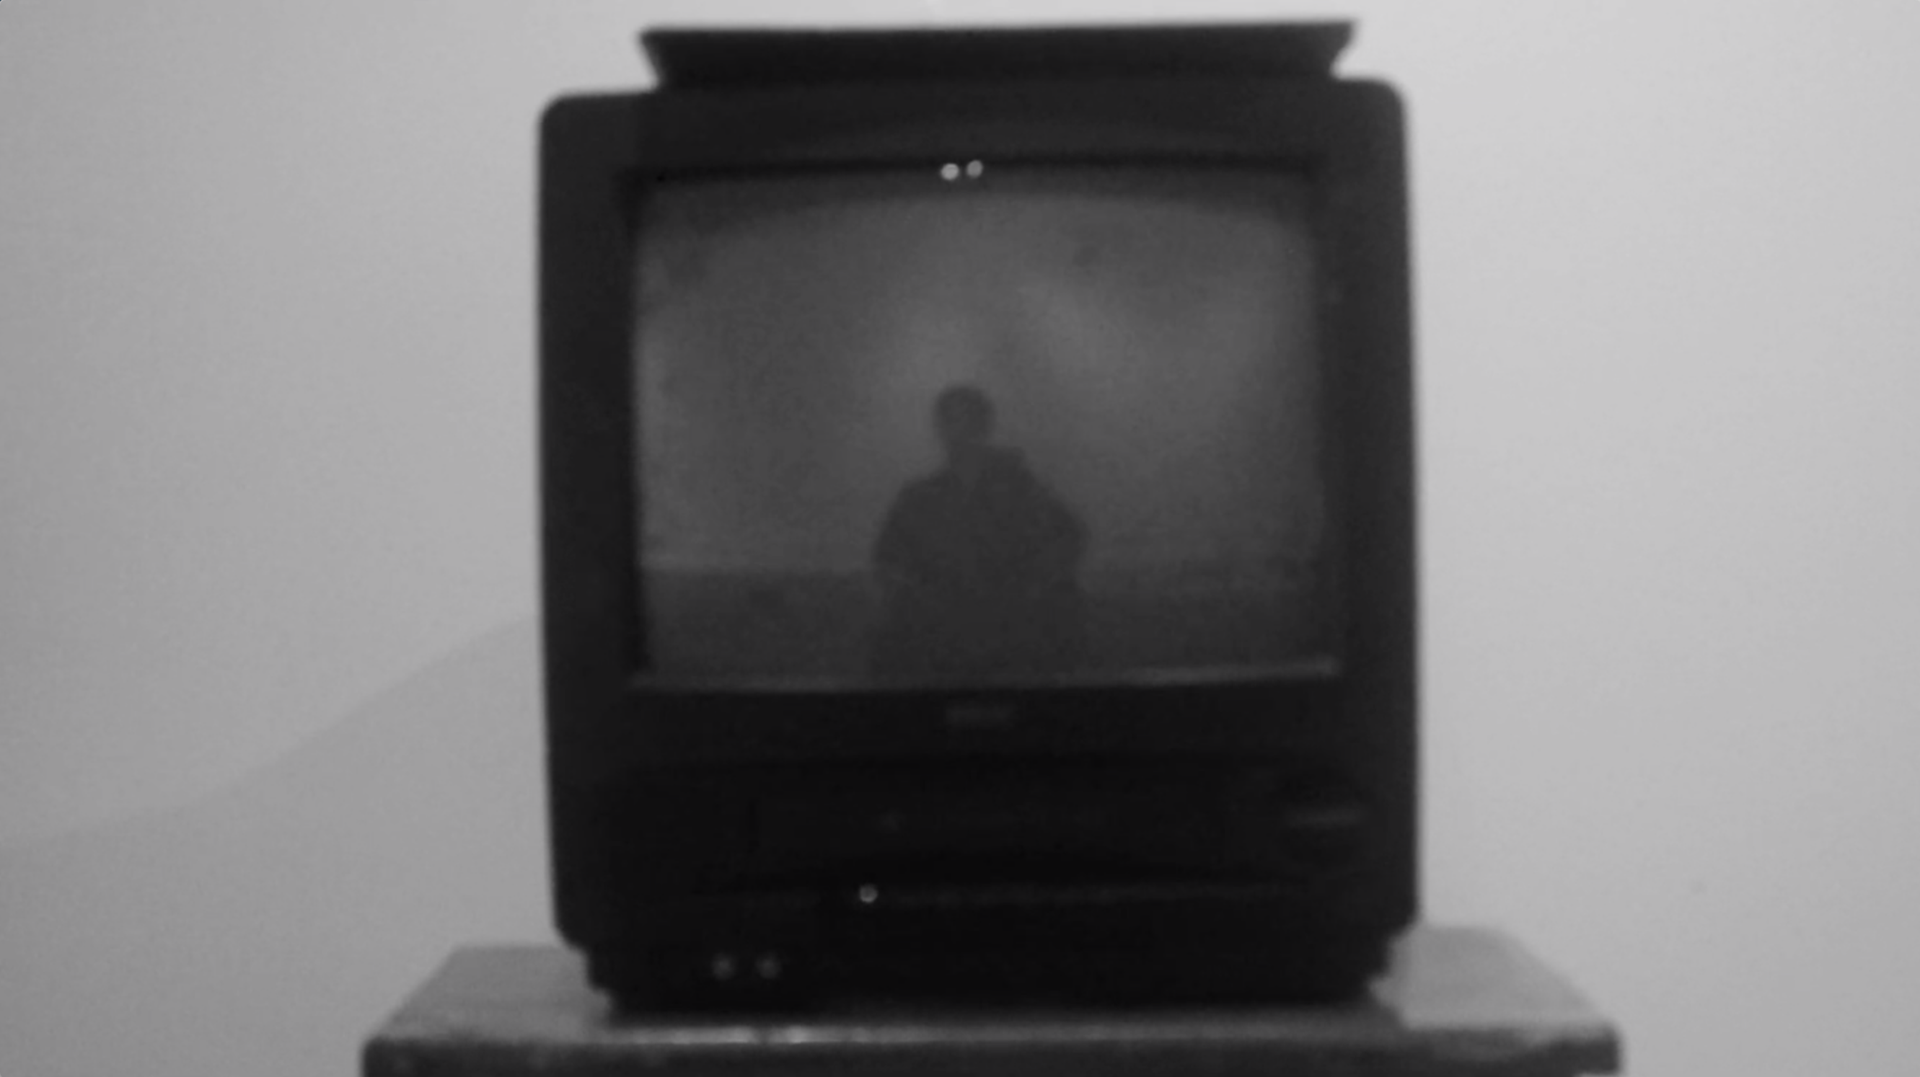 Screen capture of a digital short film which shows a black and white scene of a box television reflecting the actor who is sitting in a chair